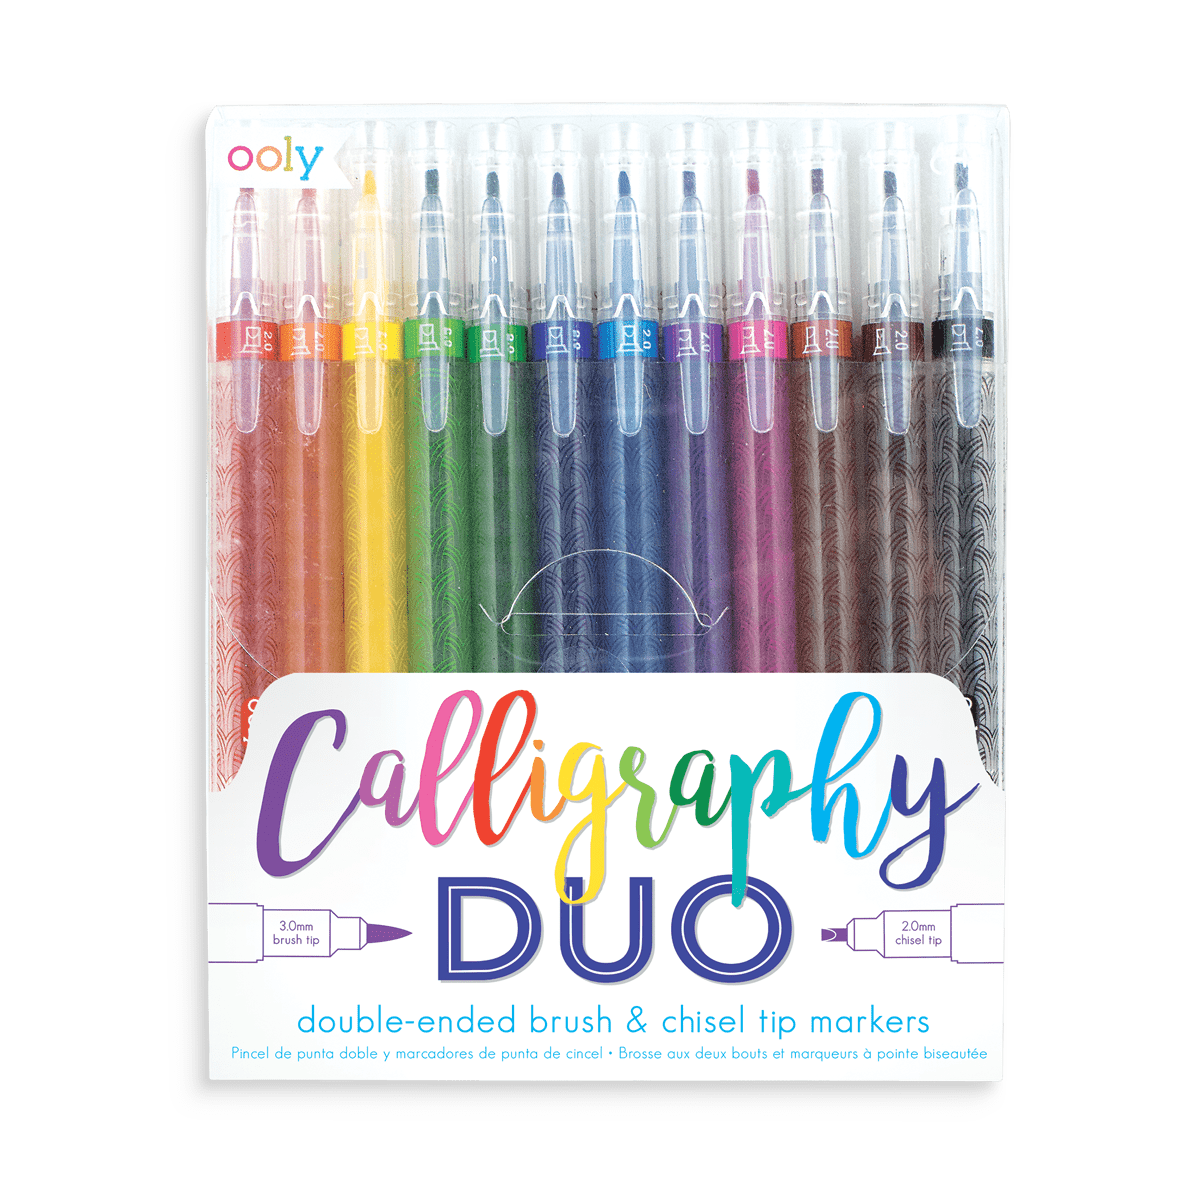 12-color Dual-tip Metallic Paint Pen For Writing On Black Paper